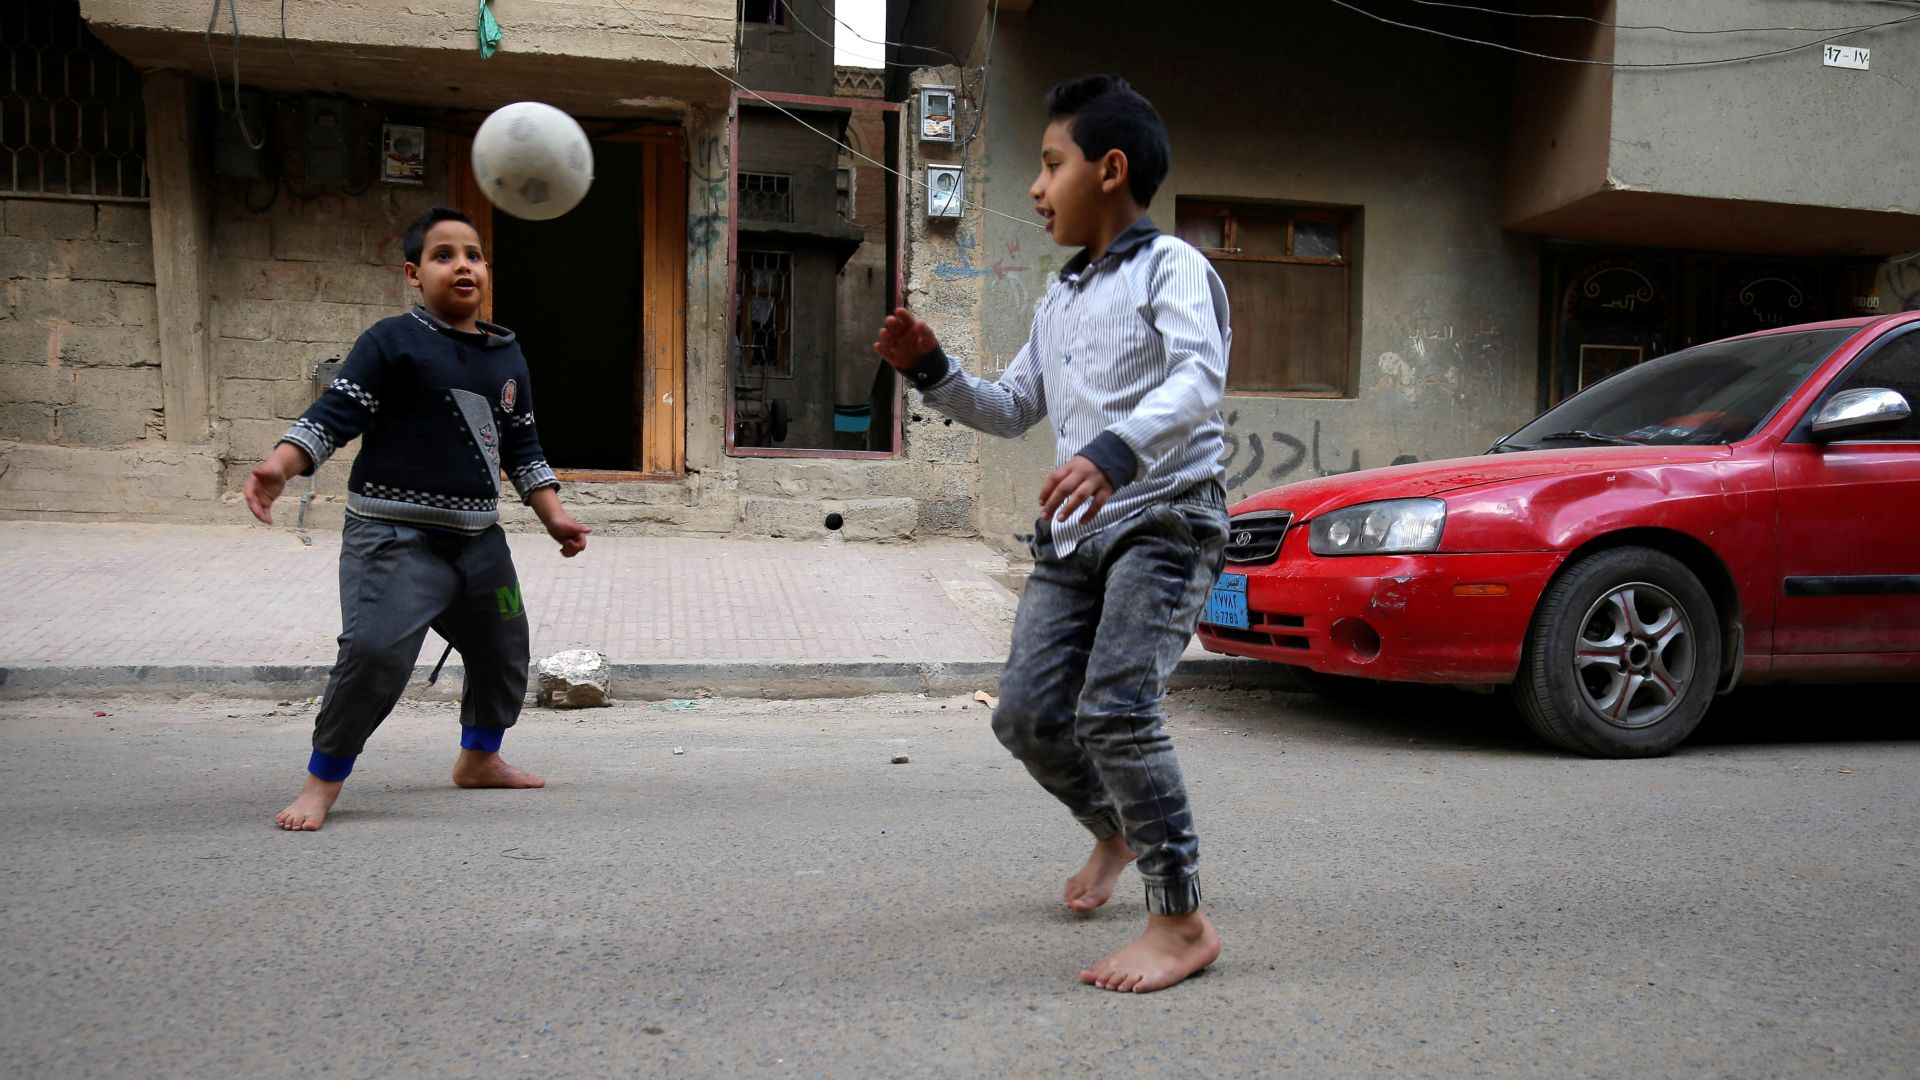 A photo of two kids playing football in the street, outside of a building with a red car in front of it.